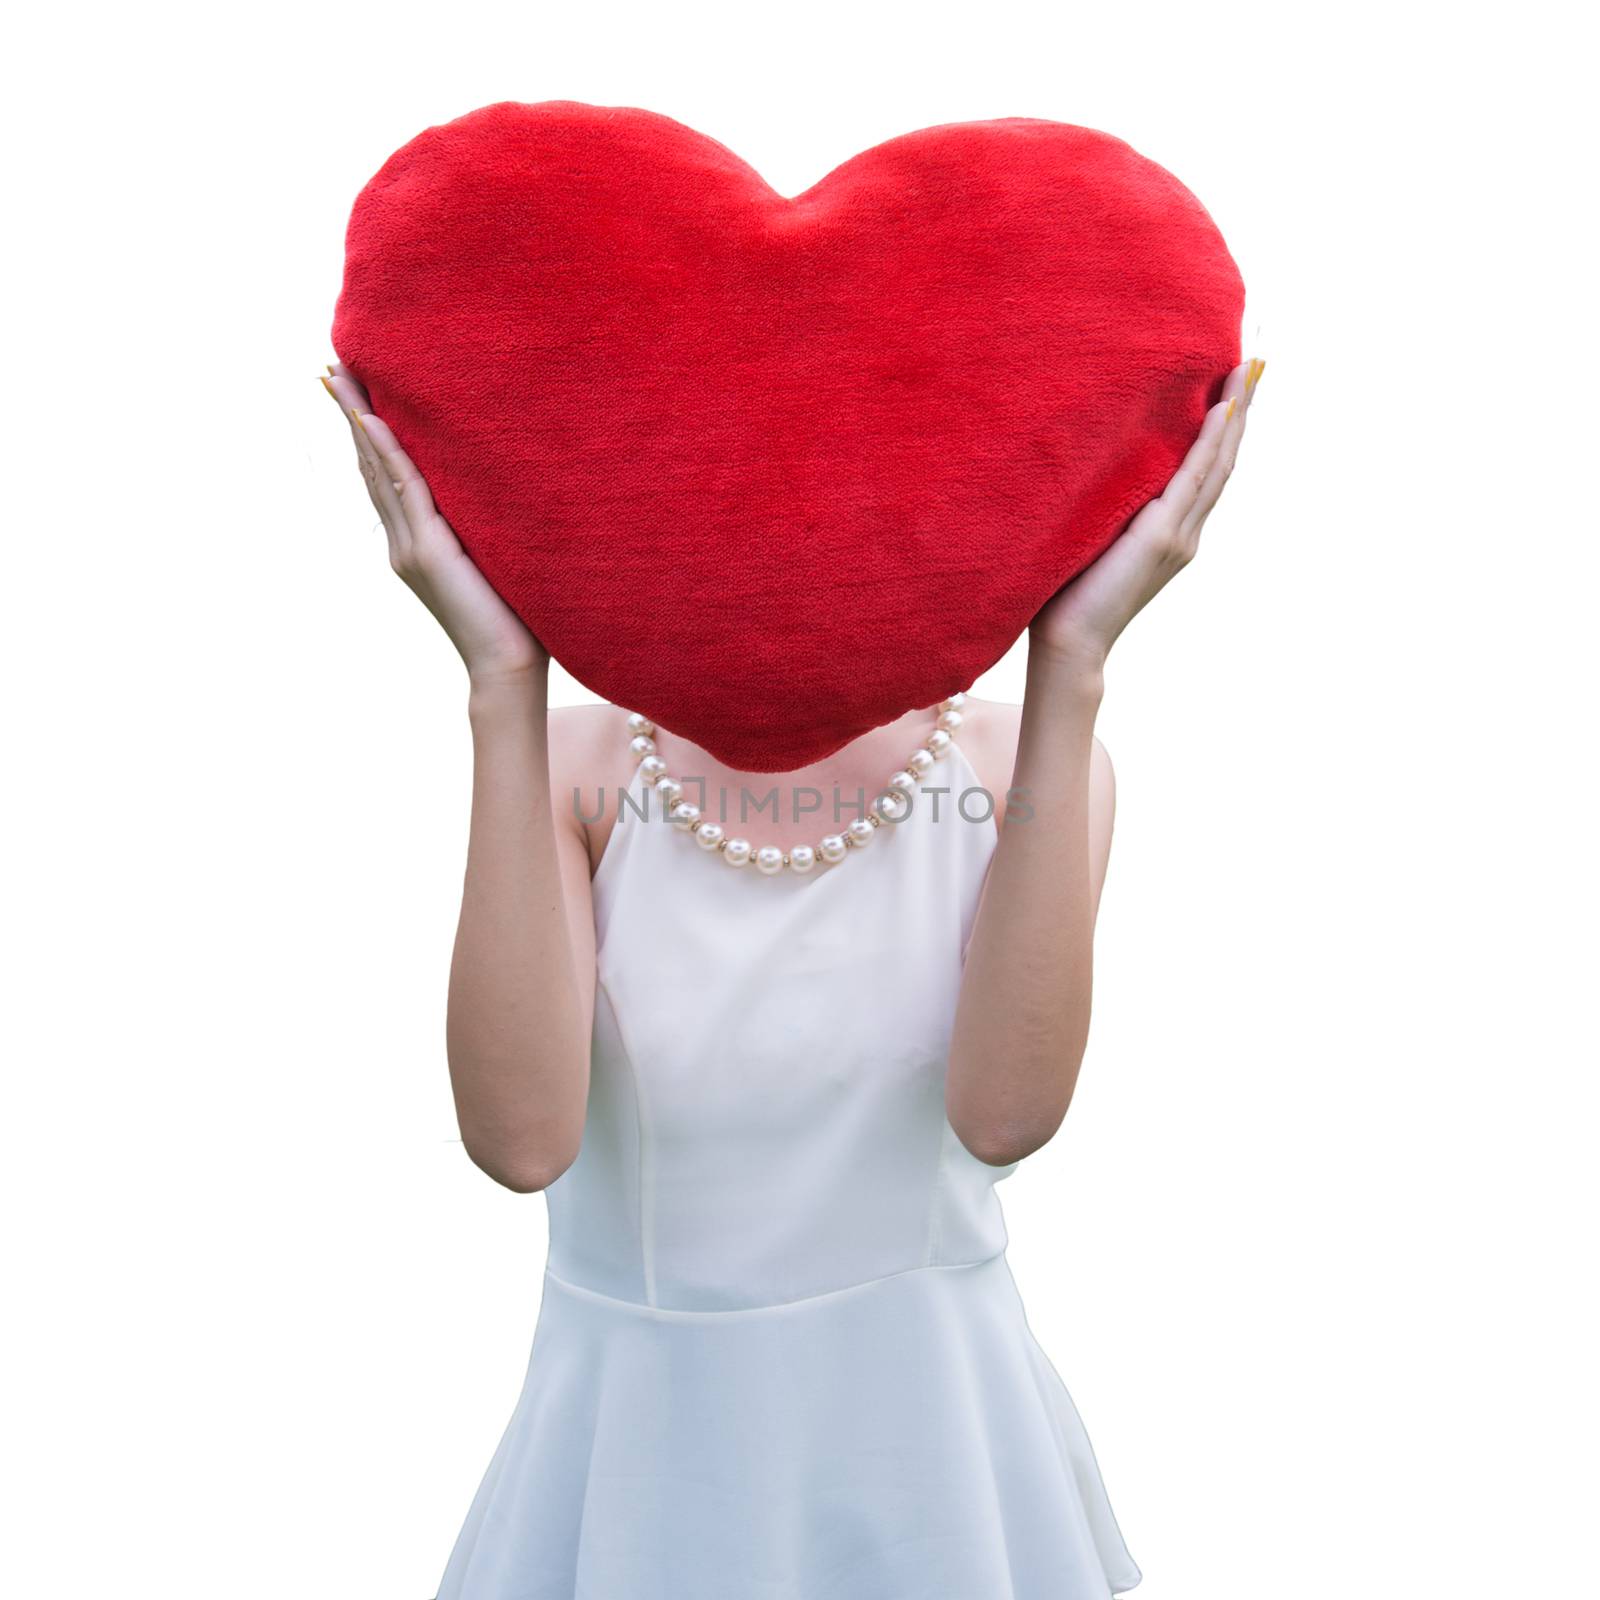 Women holding big love heart shape pillow isolated on white back by jakgree